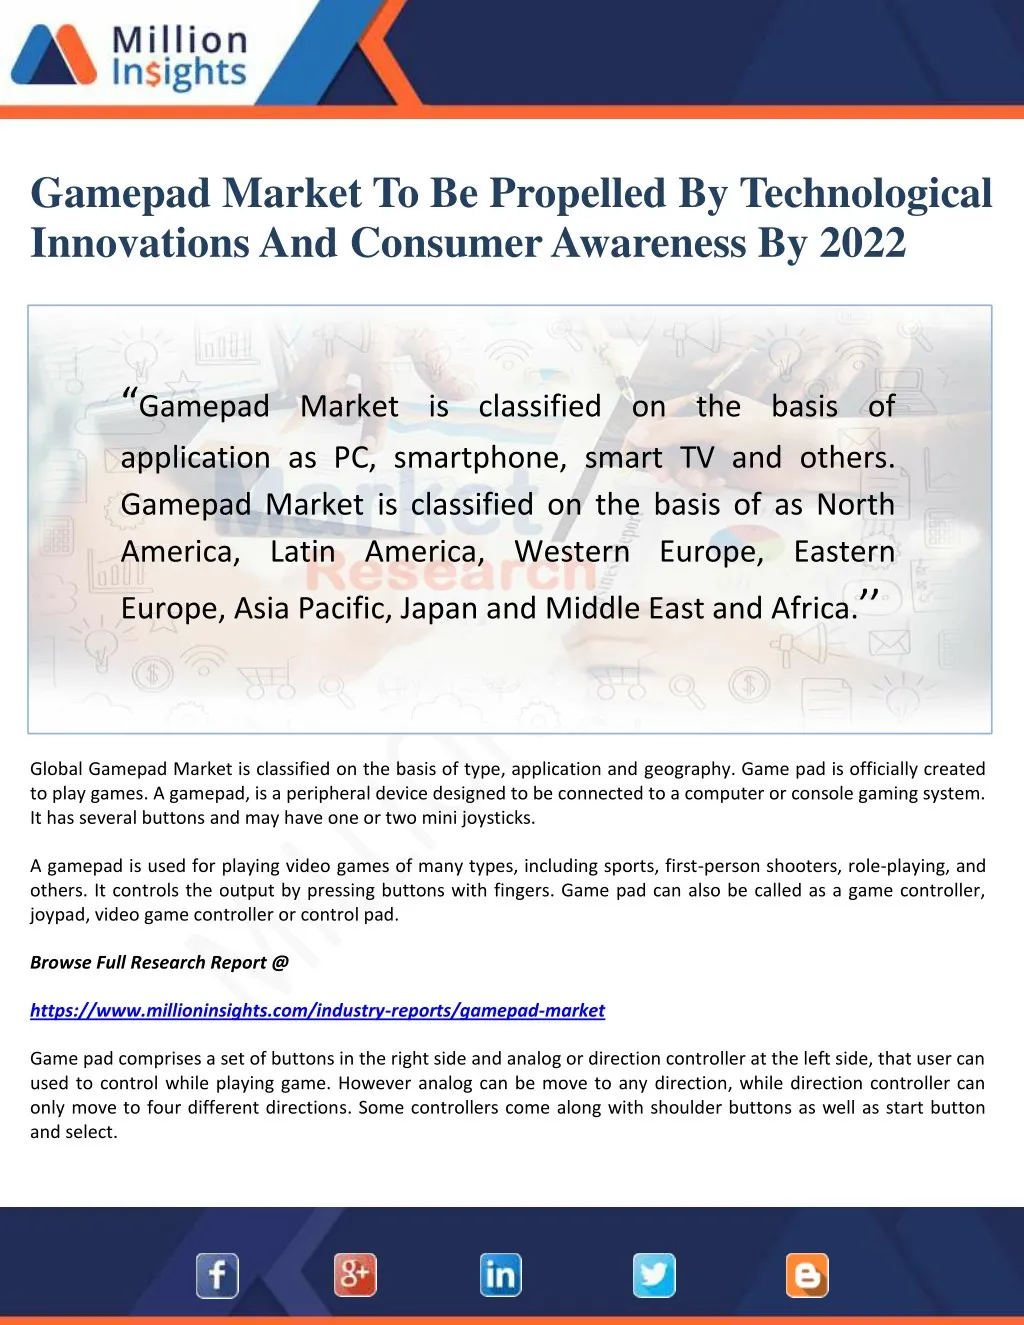 gamepad market to be propelled by technological